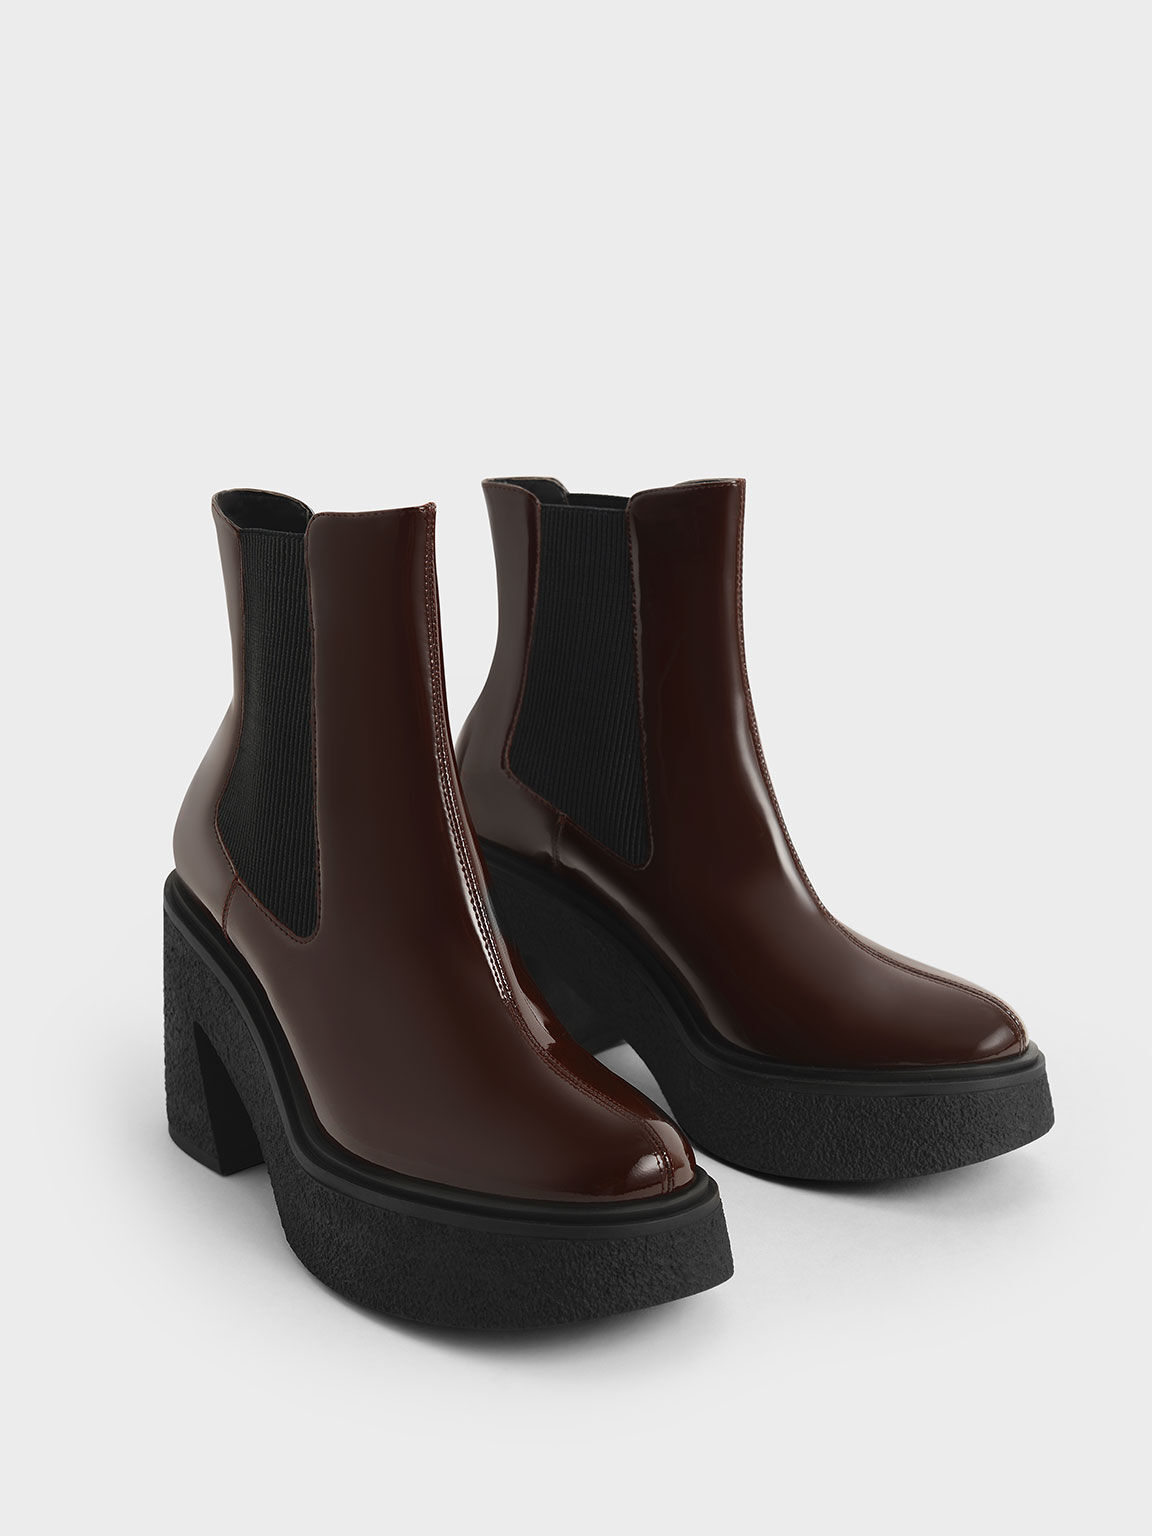 Women's Ankle Boots | Exclusive Styles - CHARLES & KEITH US